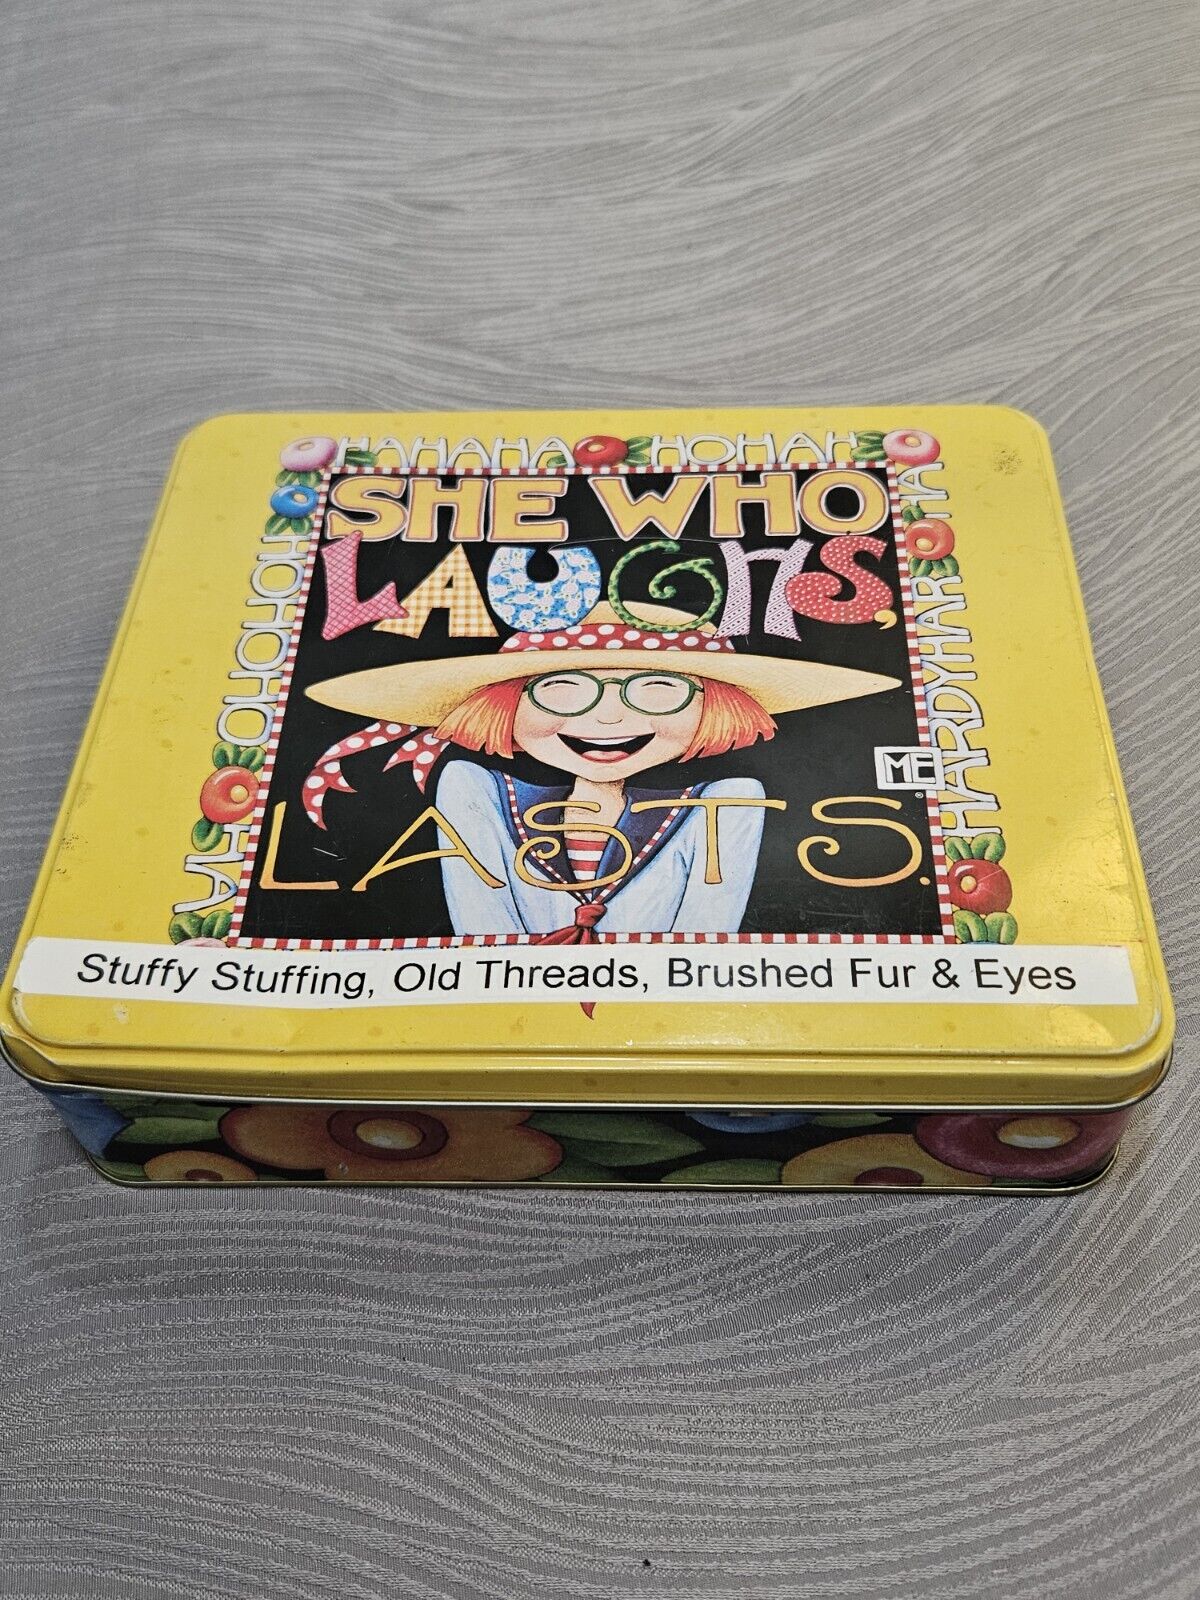 Mary Engelbreit SHE WHO LAUGHS LAST Metal Tin Storage Hinged Box Yellow Floral